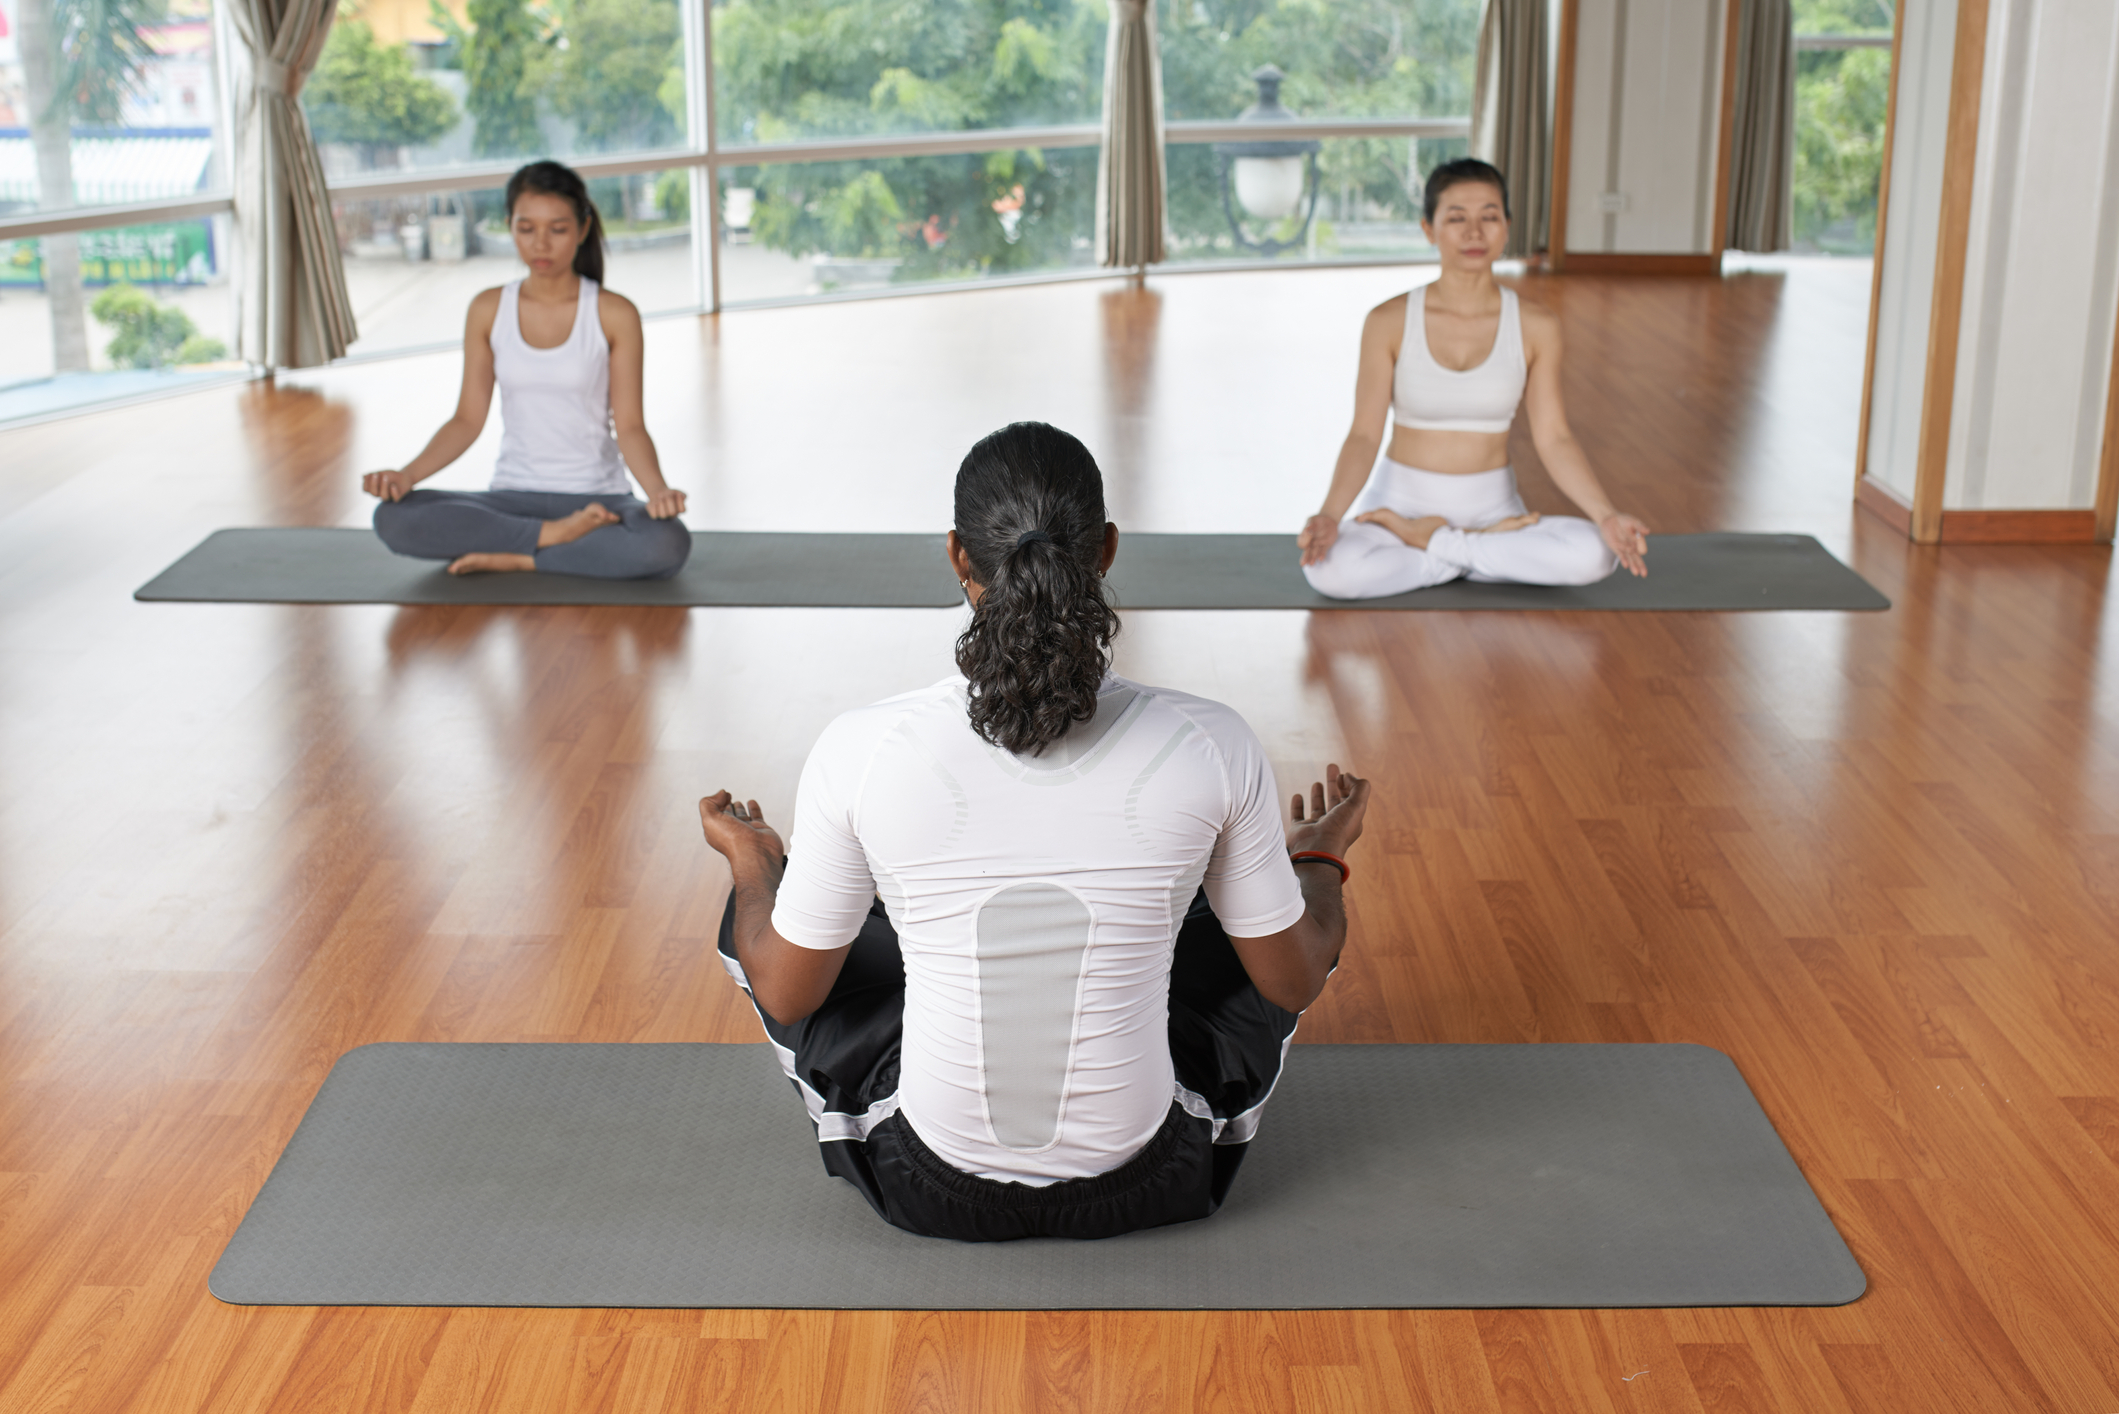 Yoga is one of the most popular activities in Singapore.